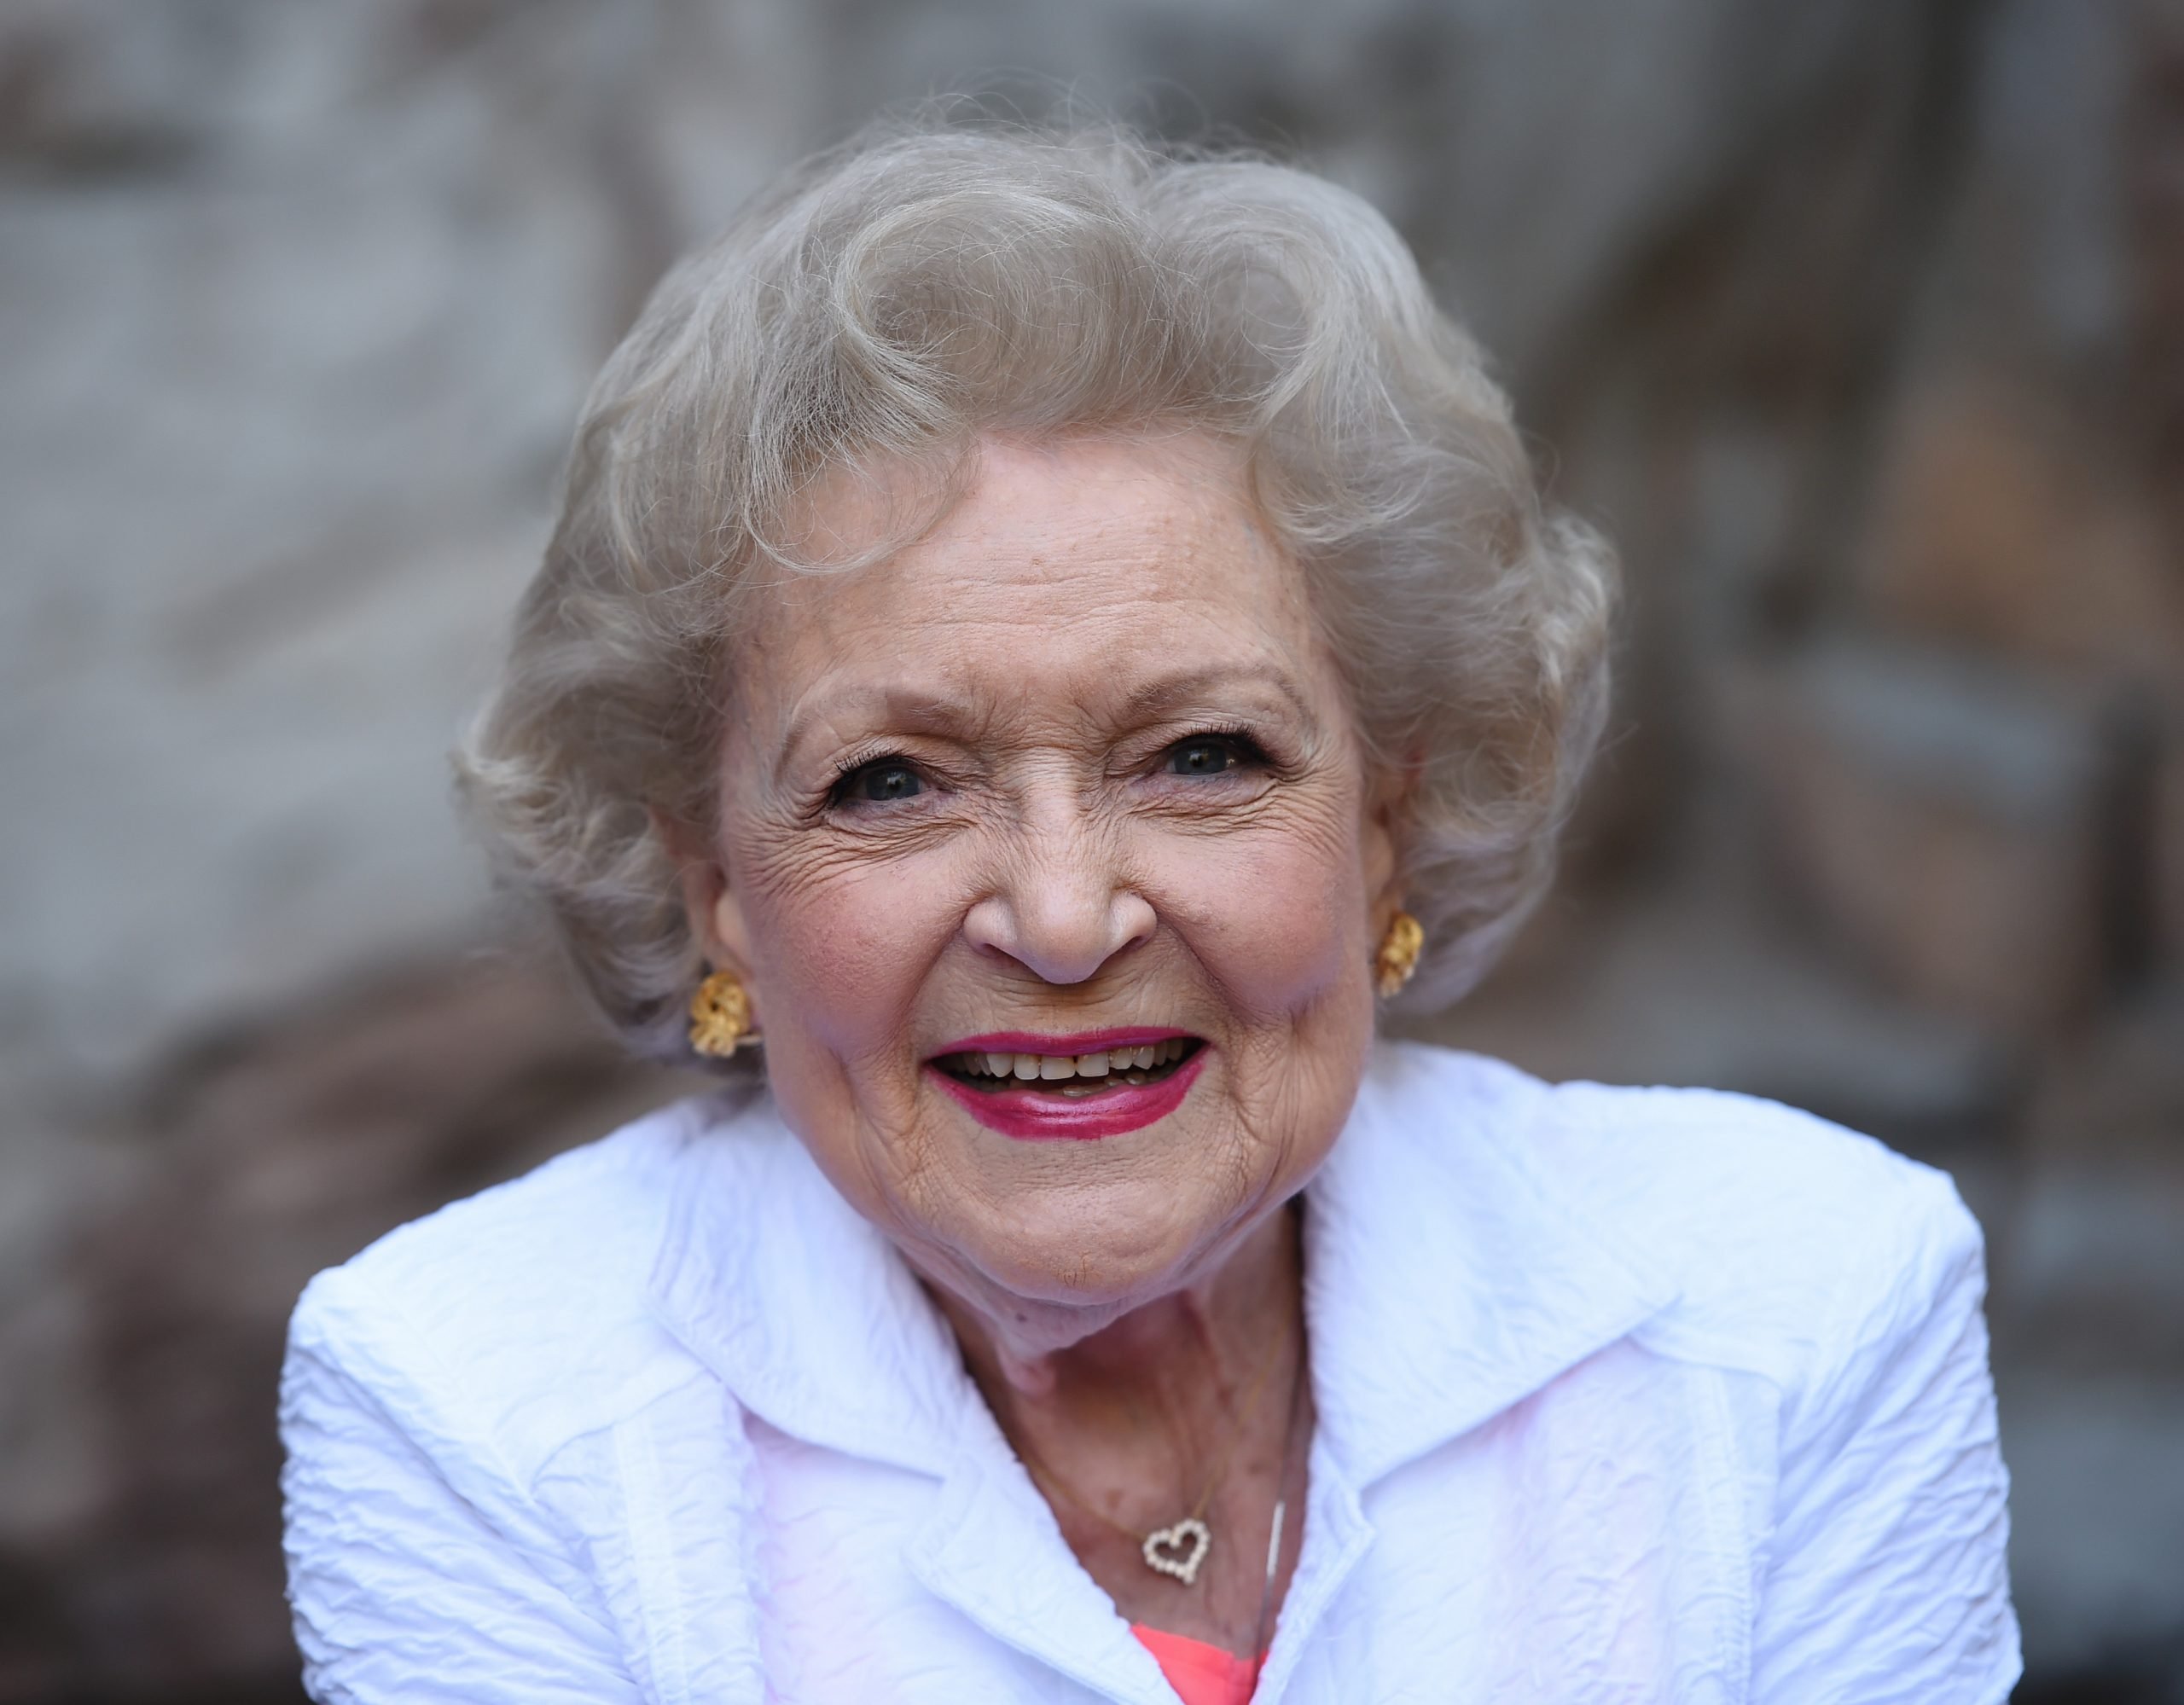 Actress Betty White attends The Greater Los Angeles Zoo Association's (GLAZA) 45th Annual Beastly Ball at the Los Angeles Zoo